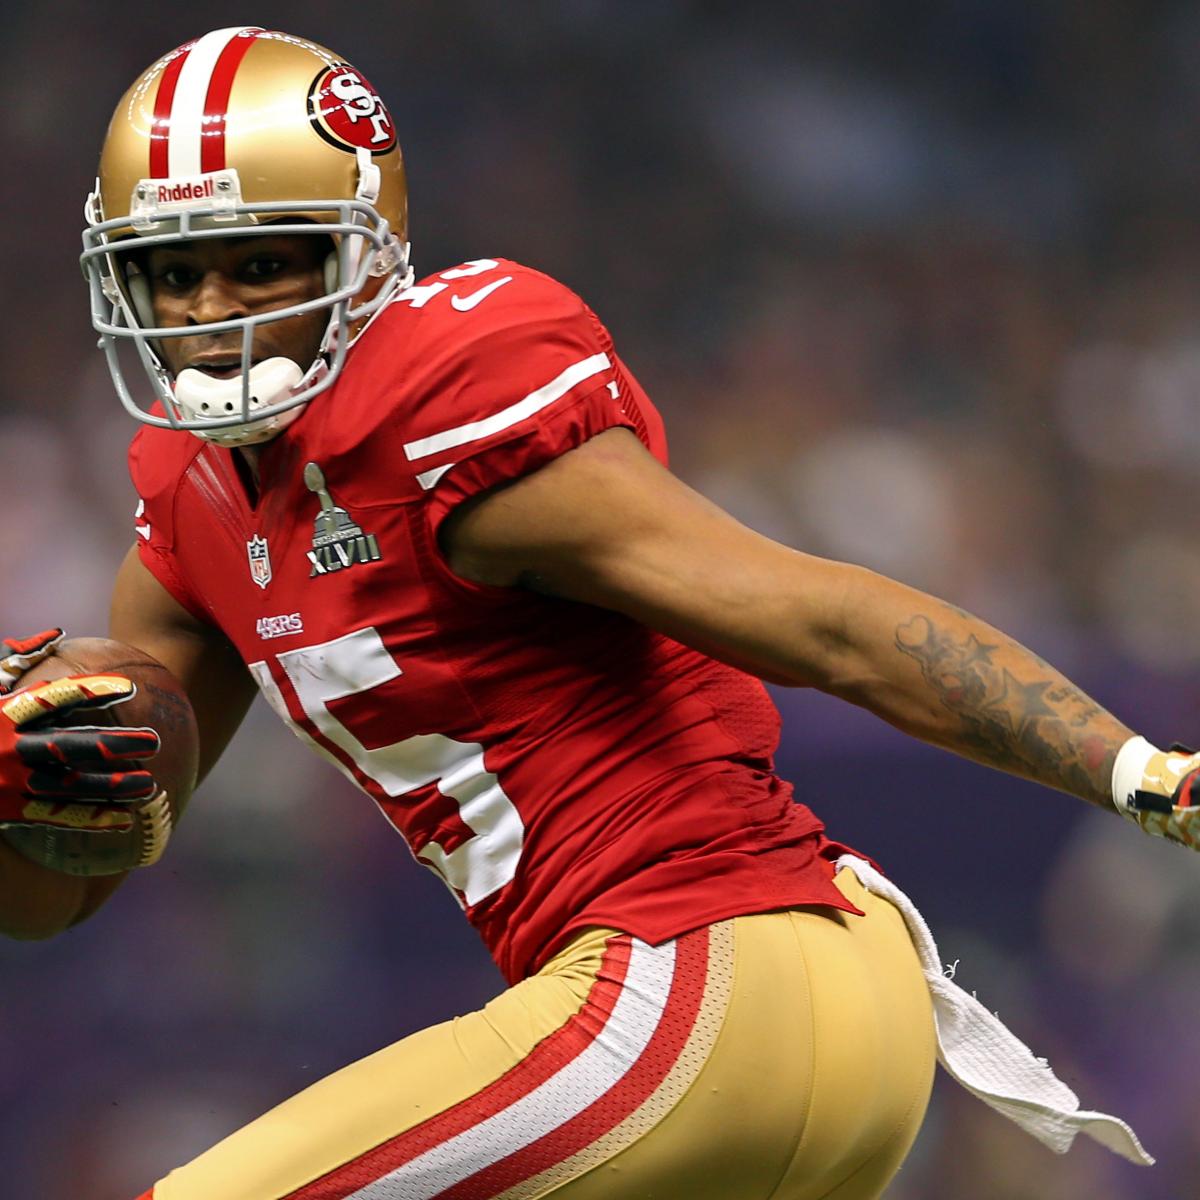 5 Reasons Each 49ers WR Could Fill Michael Crabtree's Production